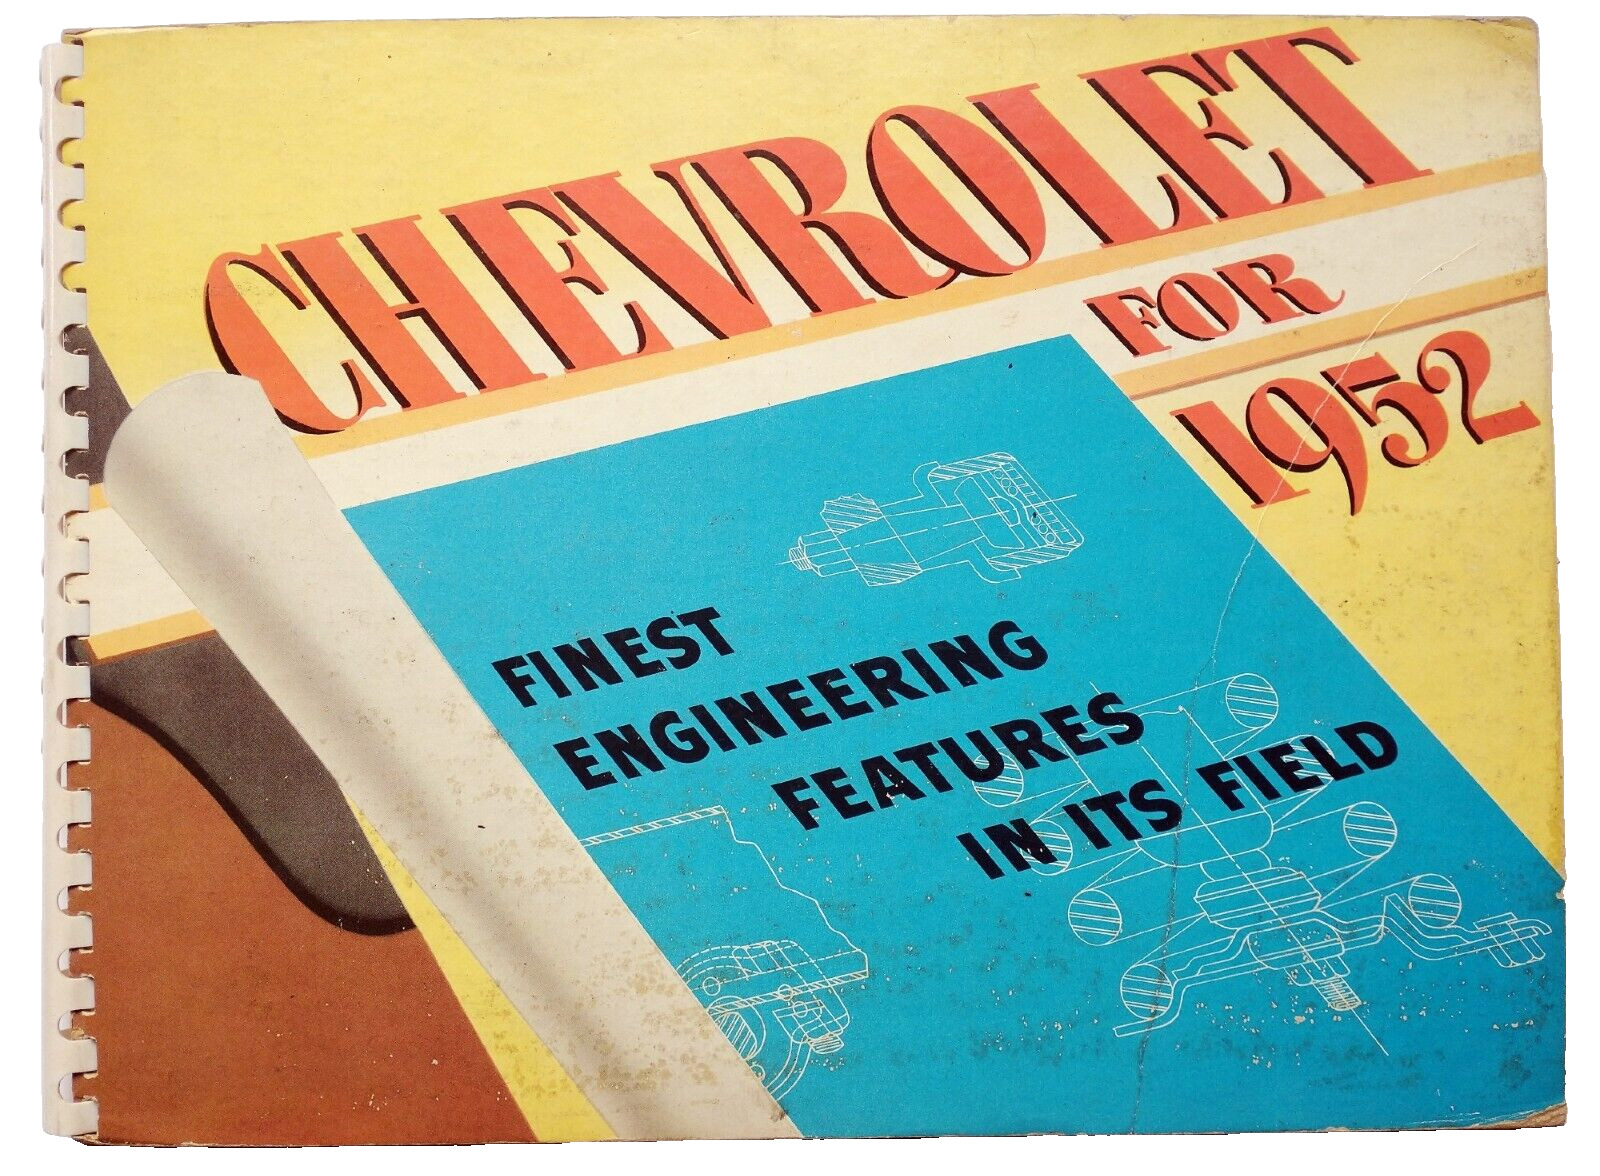 Chevrolet For 1952 Finest Engineering Features In Its Field Dealer Brochure